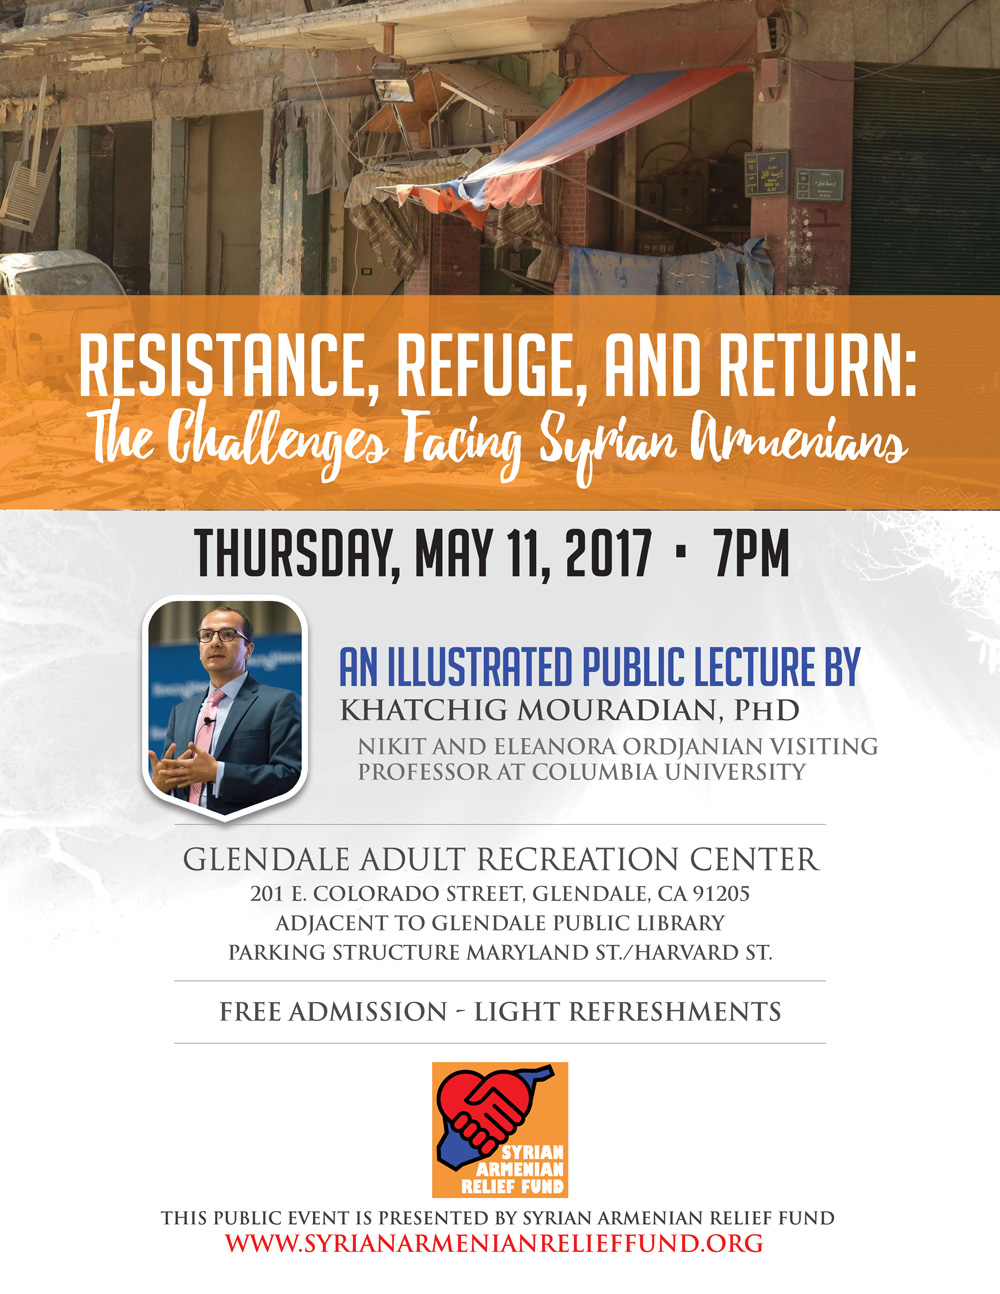 Resistance, Refuge, and Return: The Challenges Facing Syrian Armenians